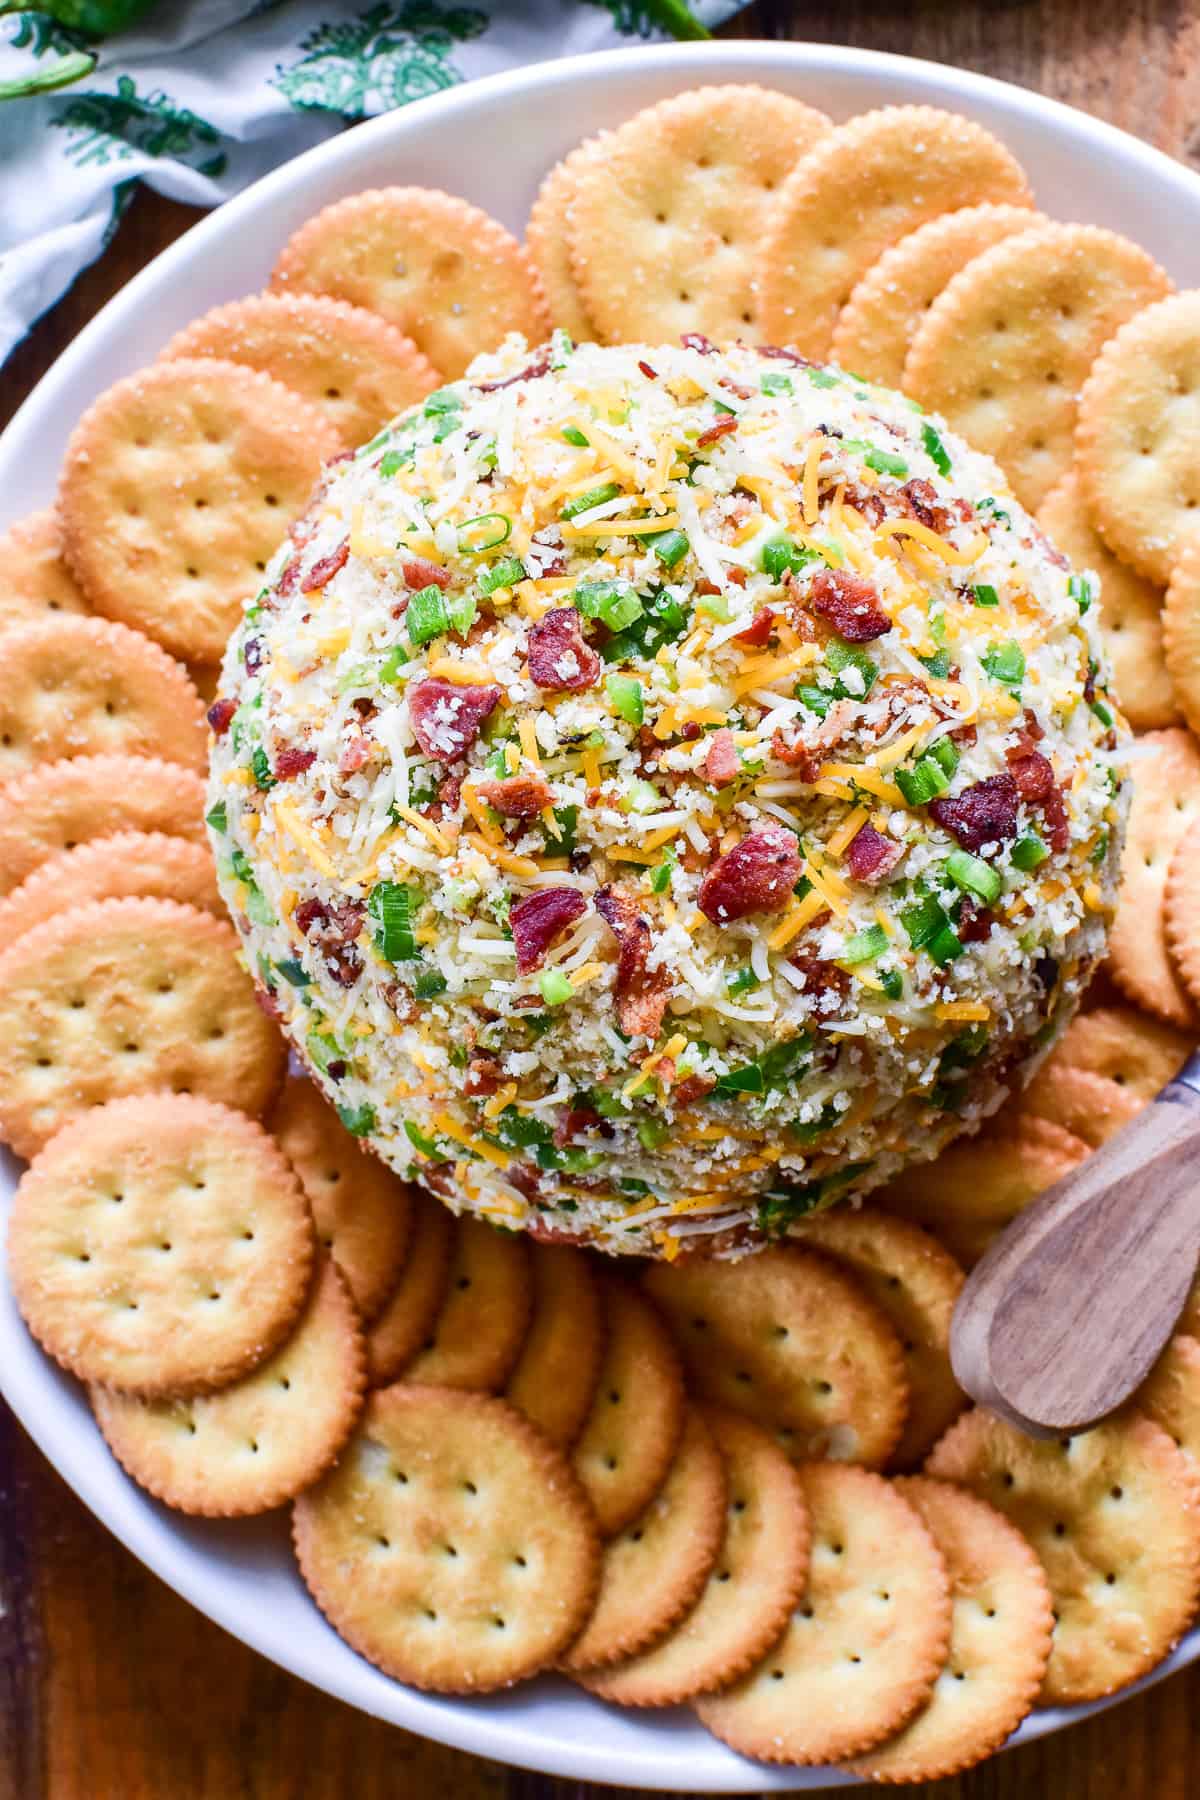 Overhead image of Jalapeño Popper Cheese Ball with Ritz crackers